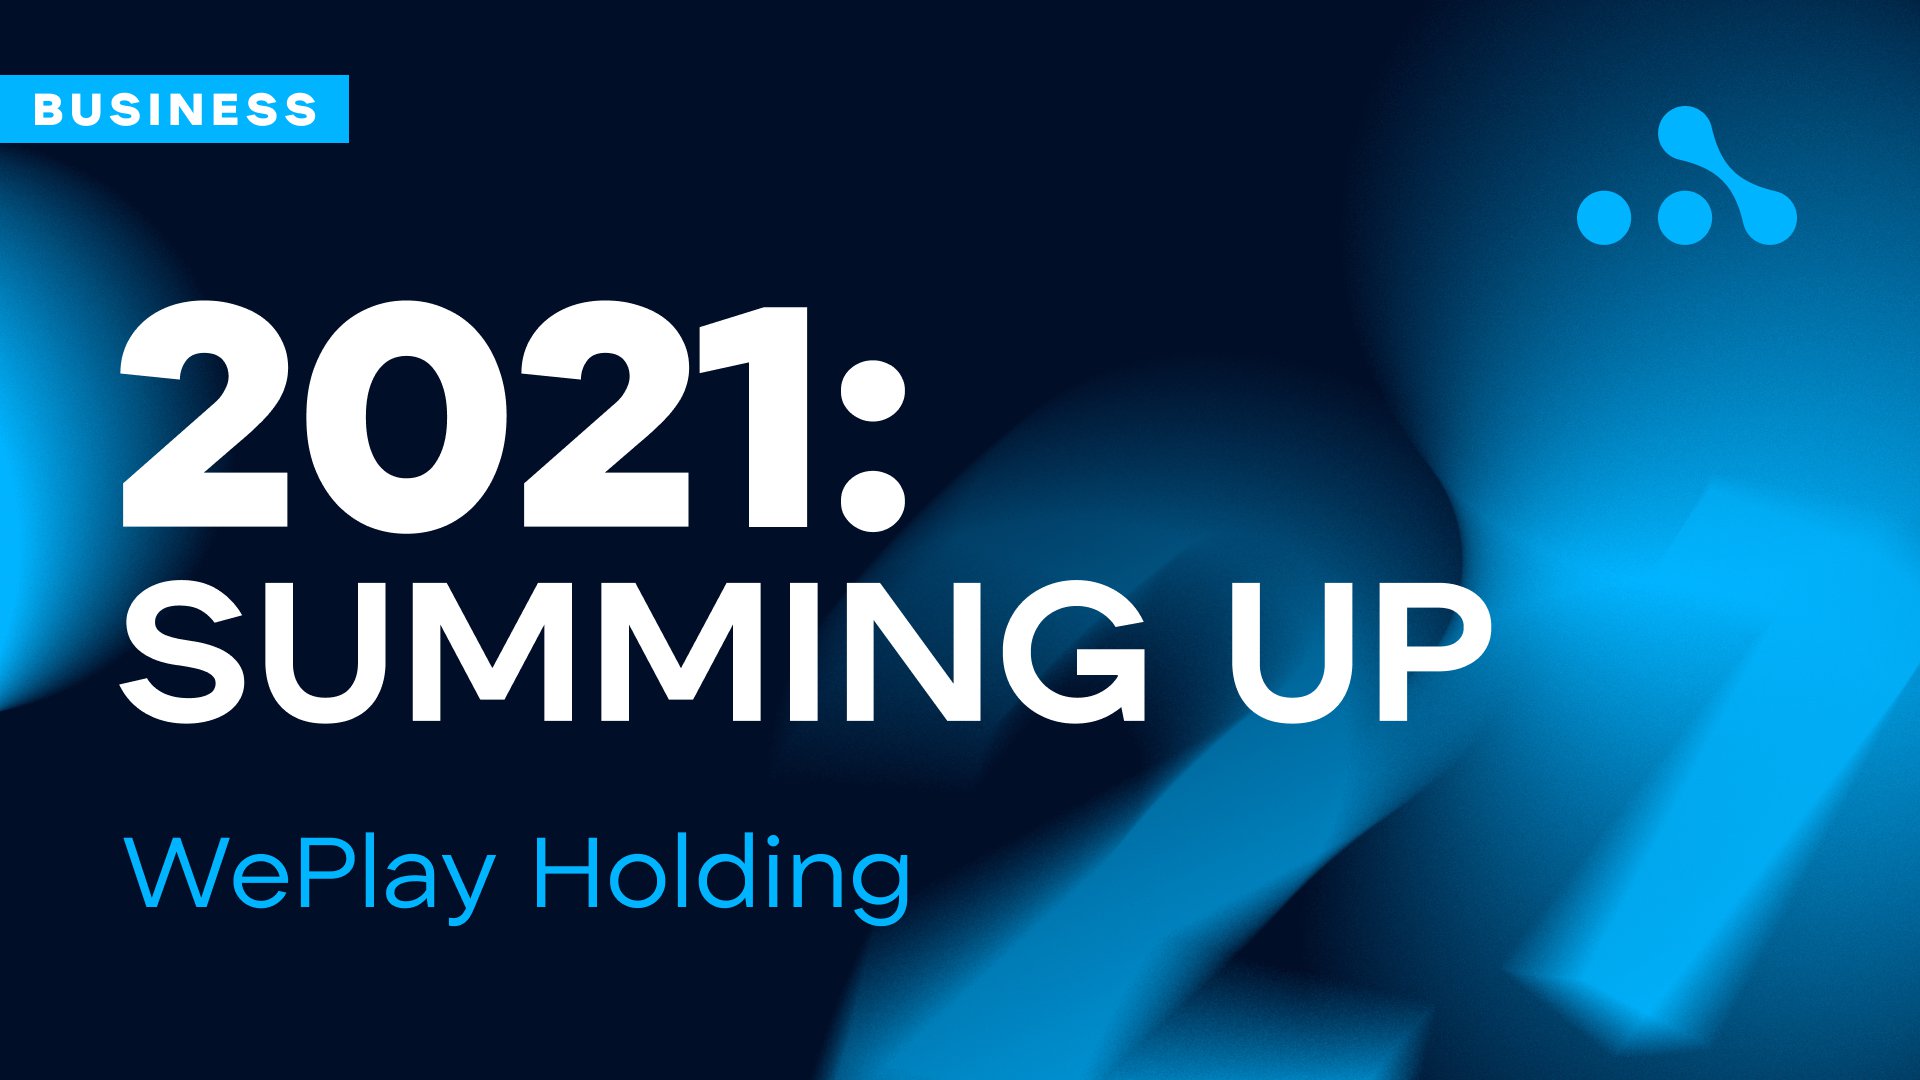 WePlay Holding – Summing up 2021. Credit: WePlay Holding